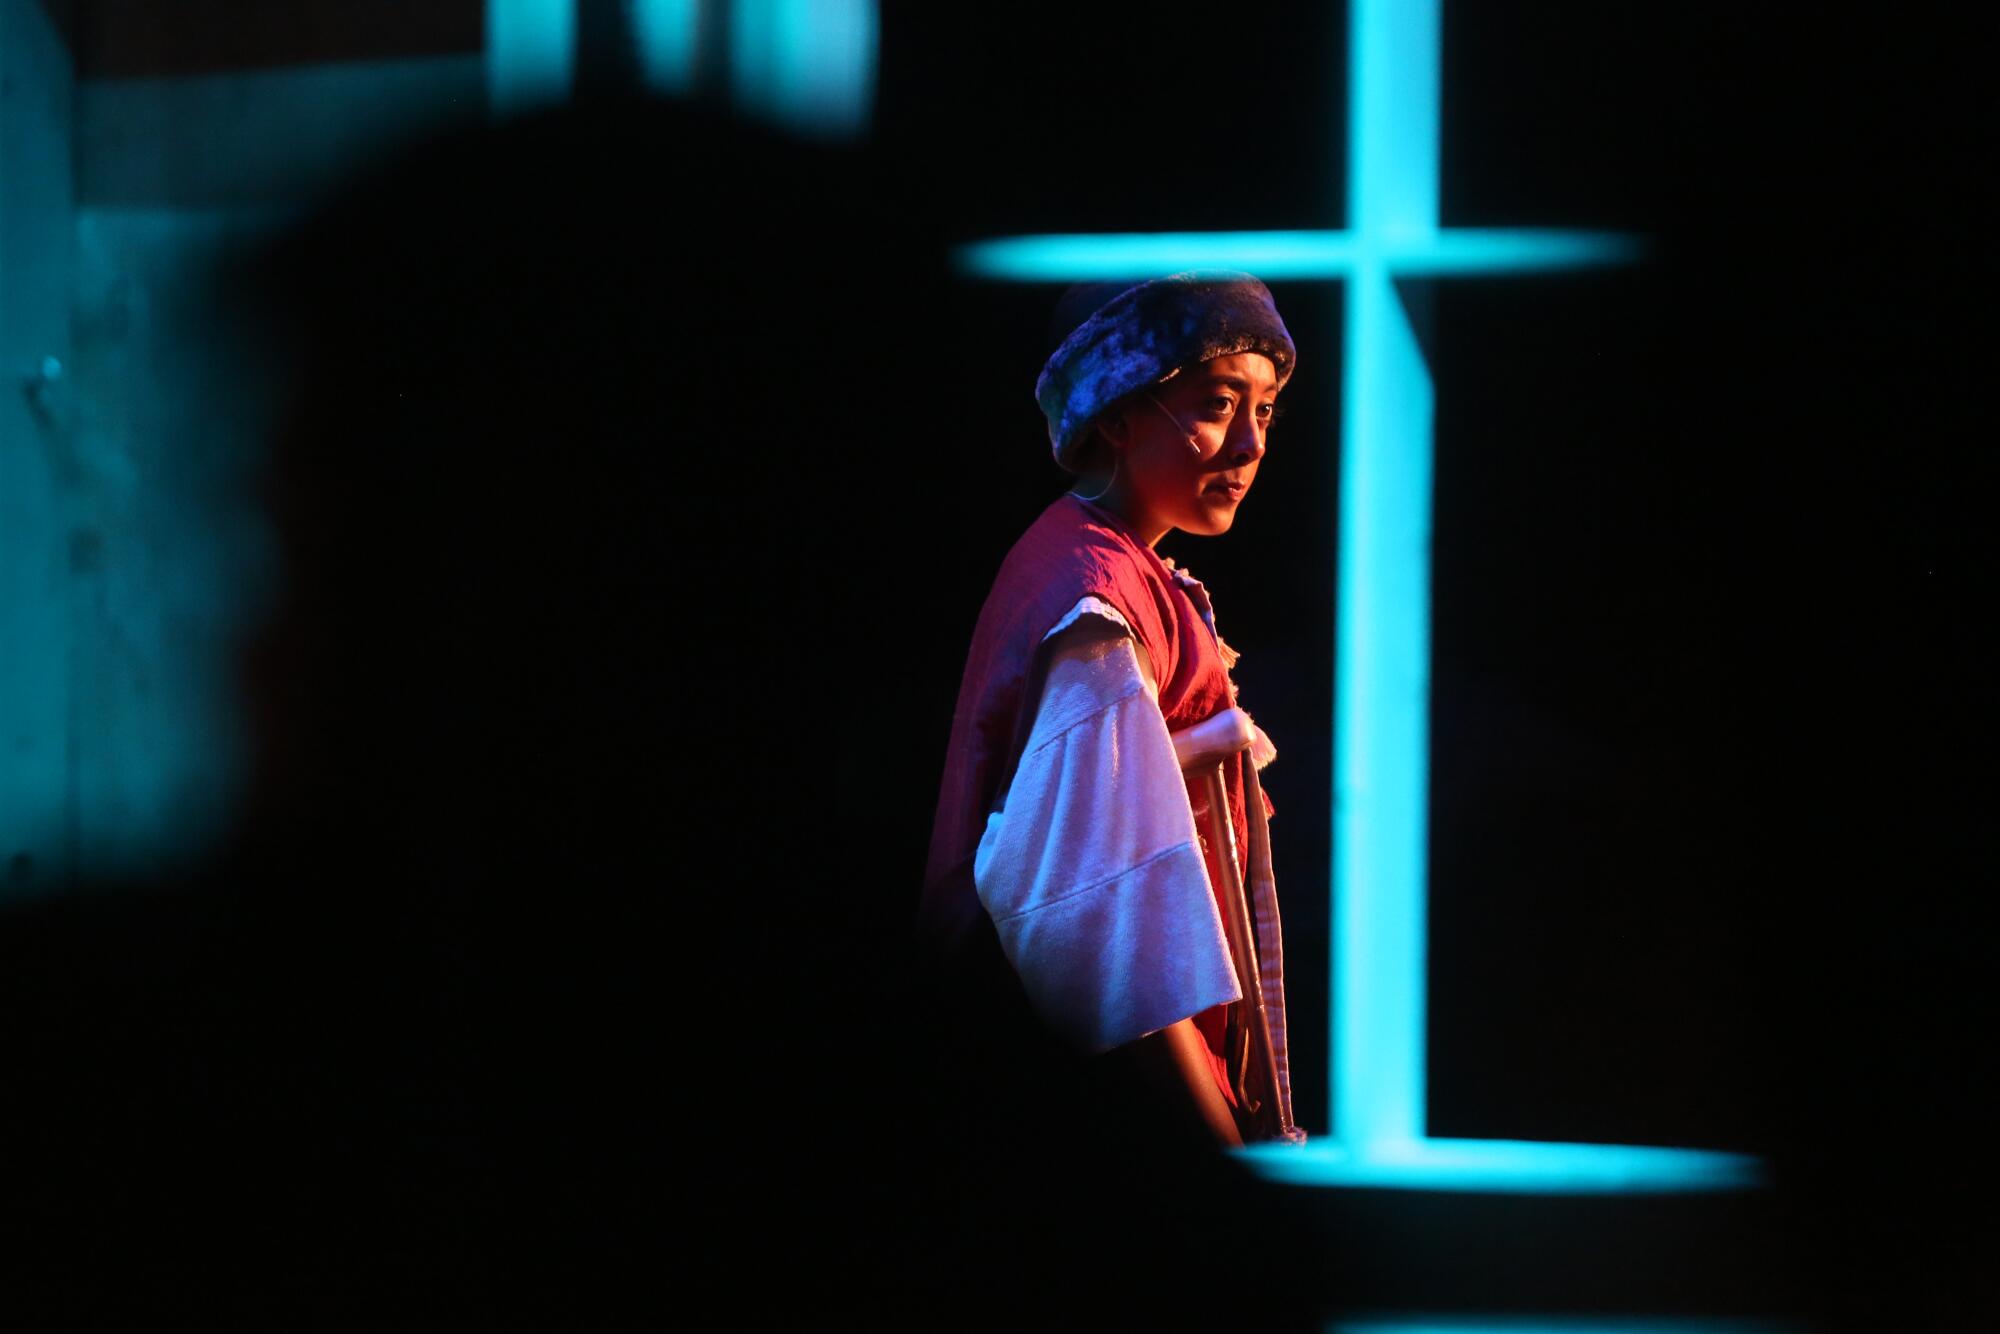 Monique Ramirez performs during a final dress rehearsal of "Amahl and the Night Visitors," at LA County High School for the Arts on November 15, 2019.